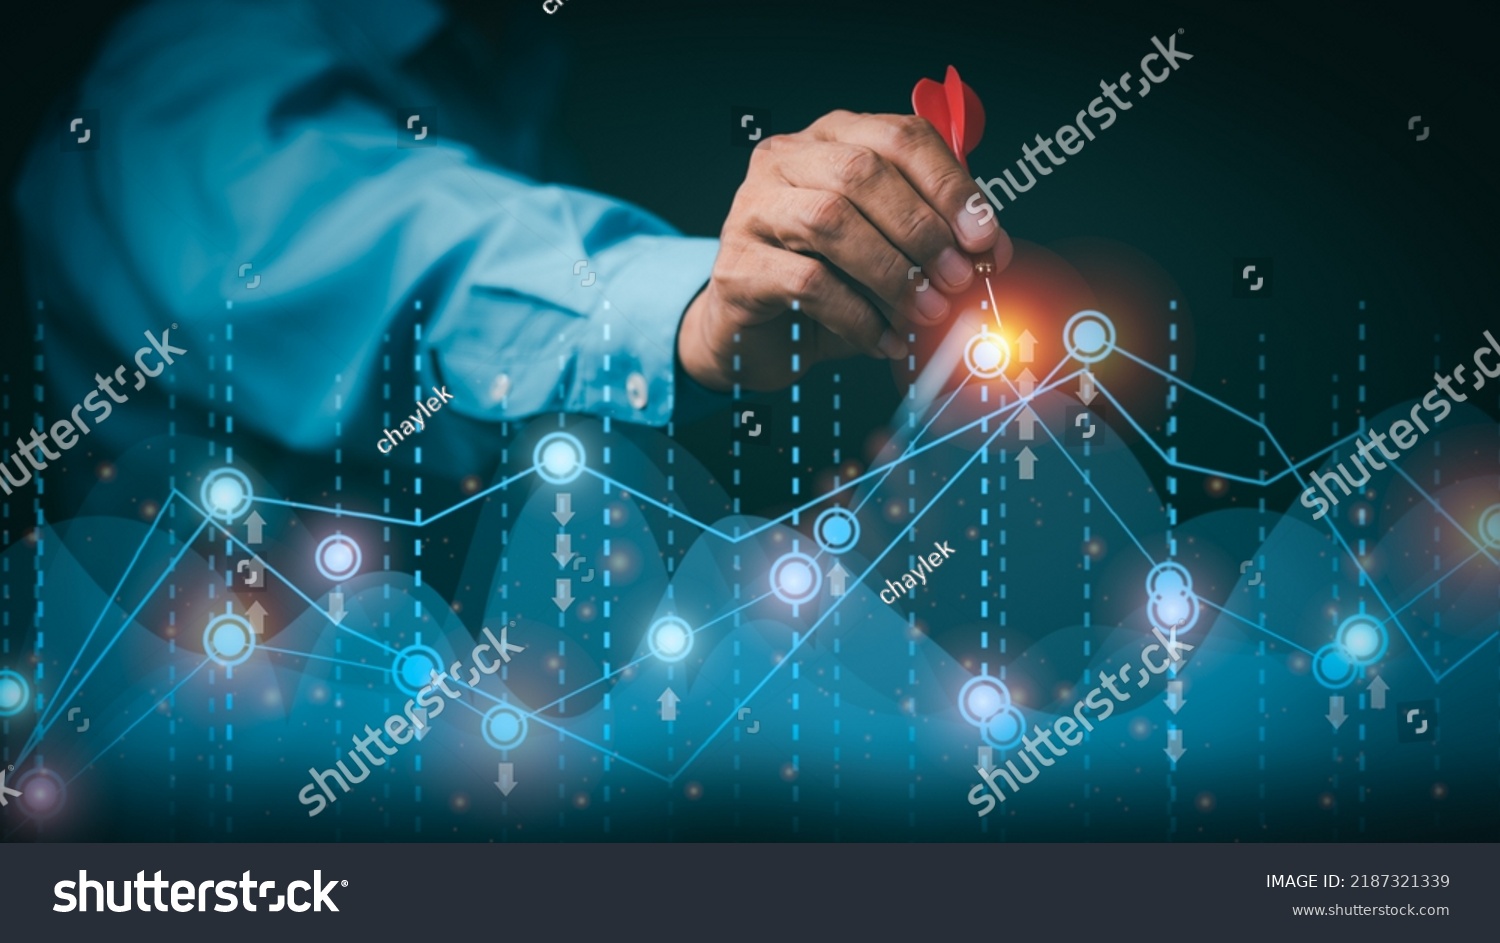 Businessman holding arrow pointing to graph, goal setting ideas and business strategies. through planning and teamwork To analyze and develop company performance from growth data to the future. #2187321339